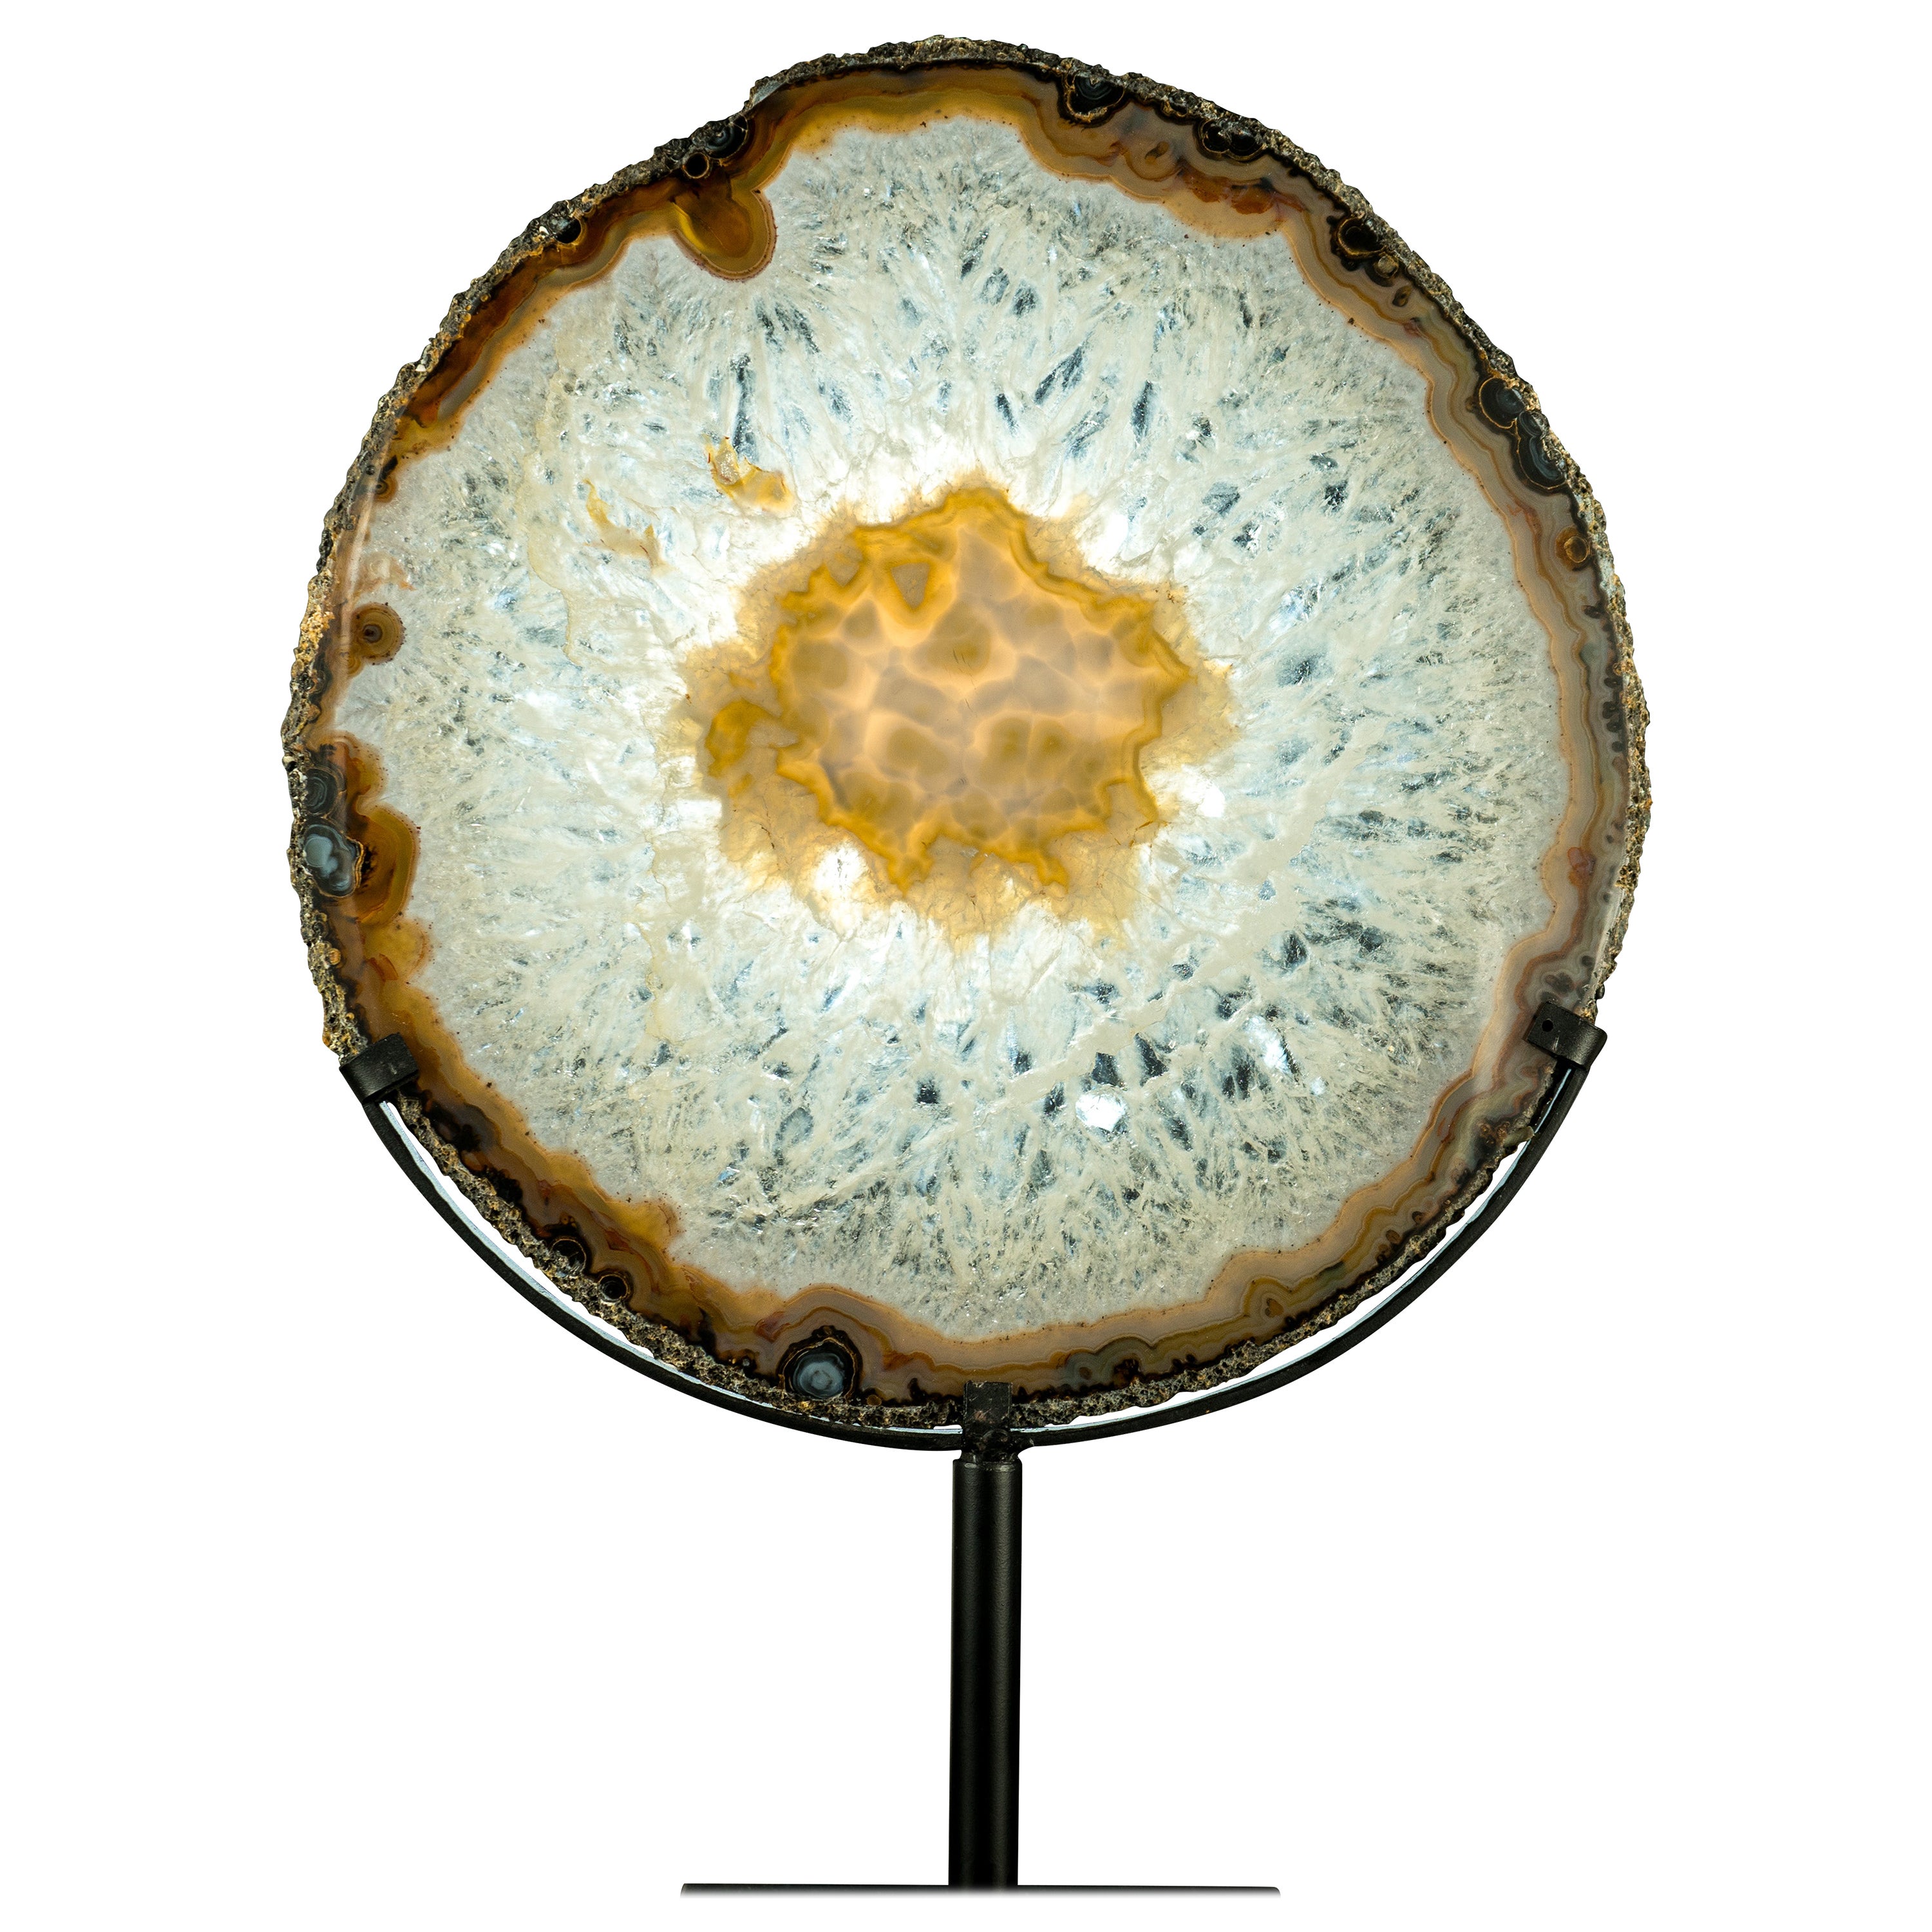 World-Class Large Lace Agate Slice, with Ice-Like Crystal and Colorful Agate For Sale